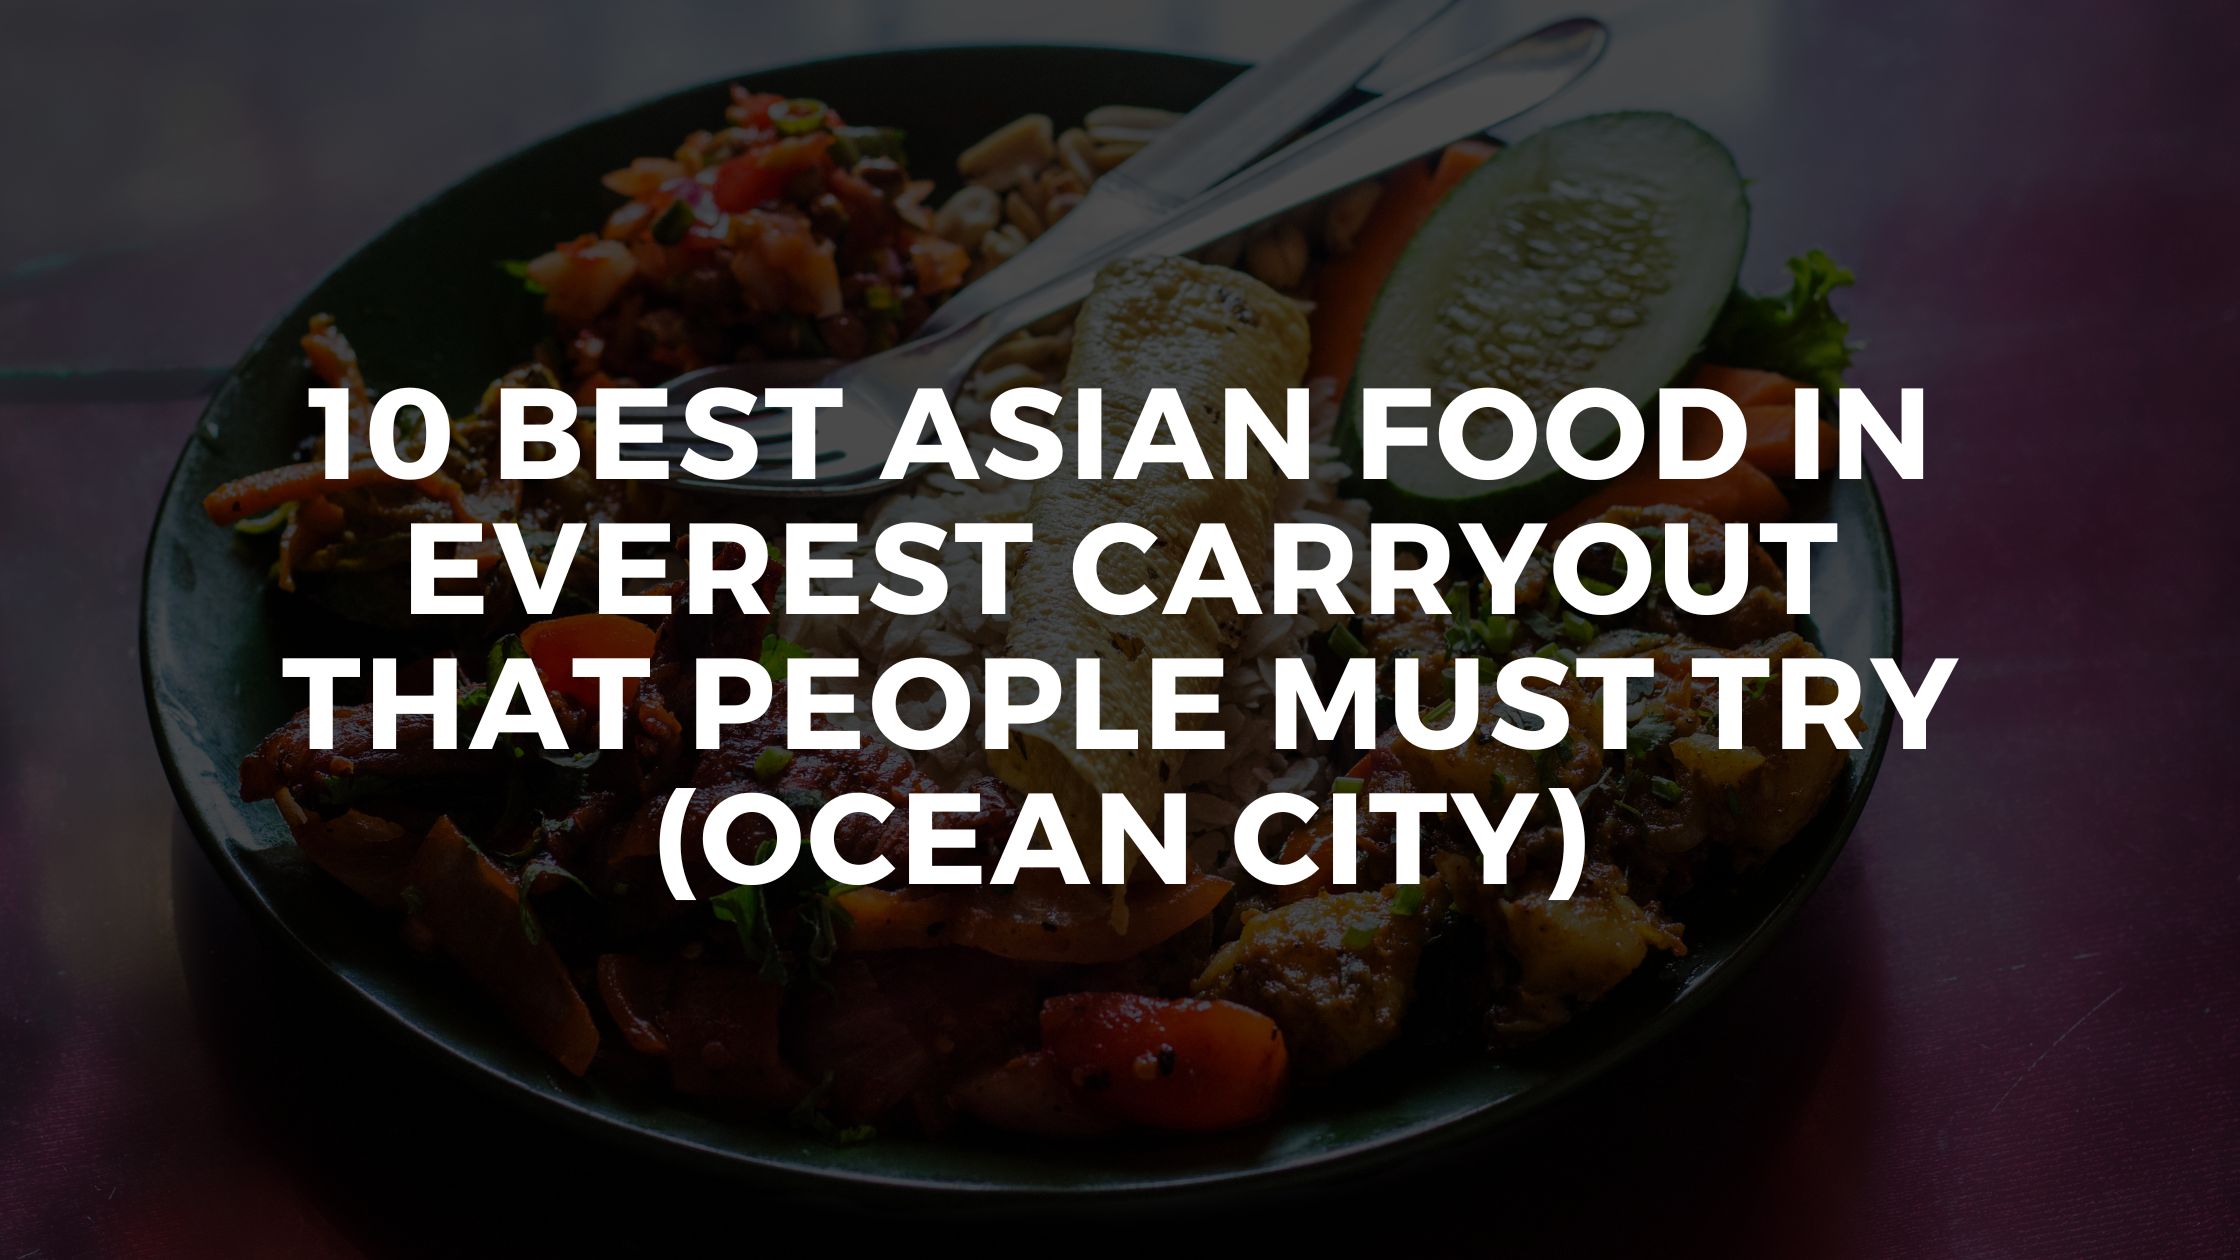 10 Best Asian Food In Everest Carryout That People Must Try (Ocean City)